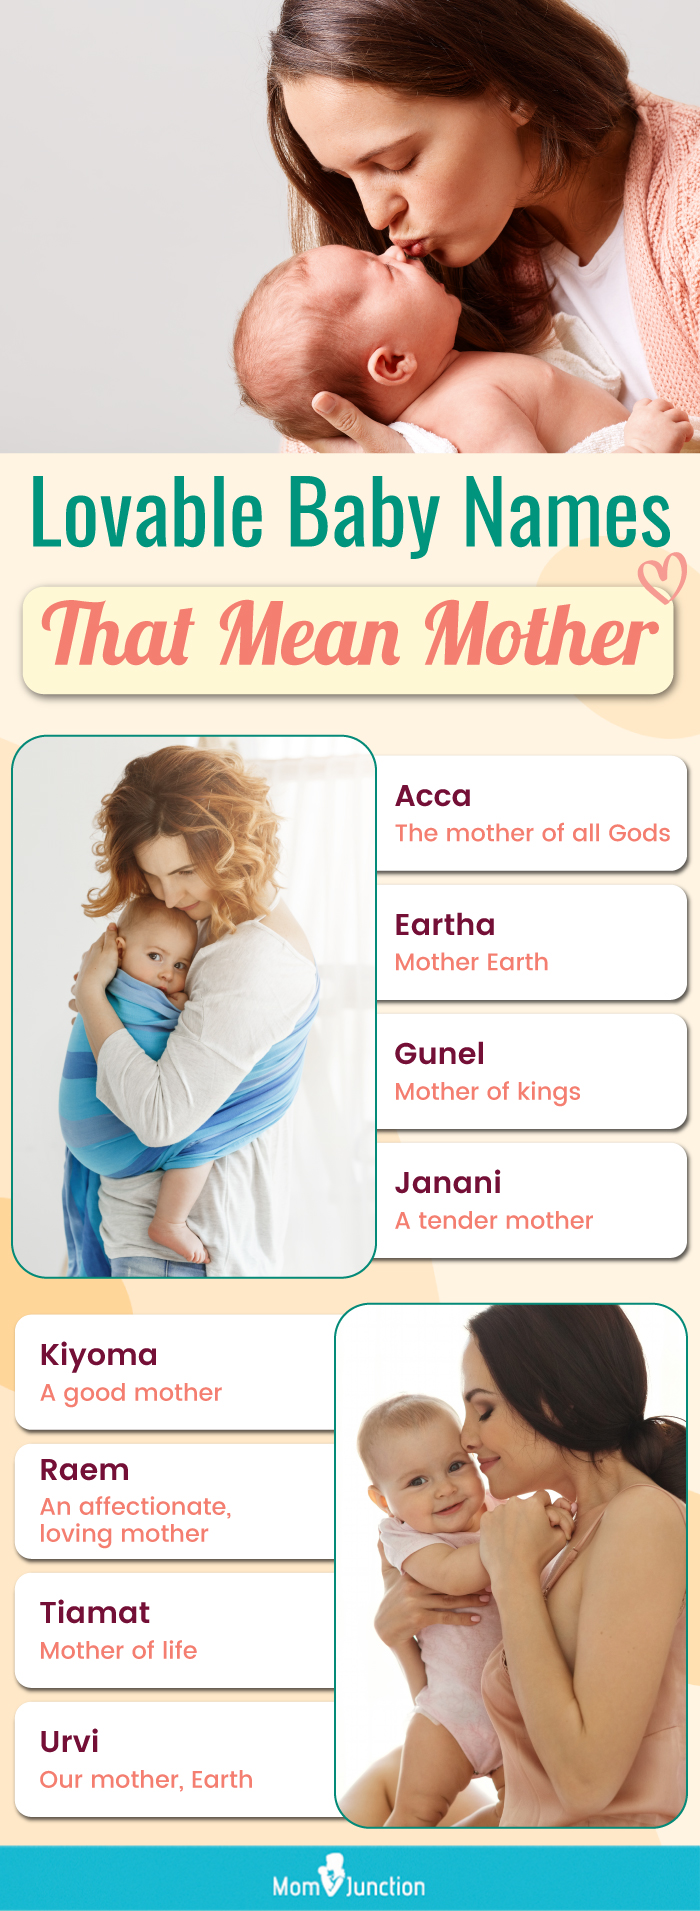 lovable baby names that mean mother (infographic)